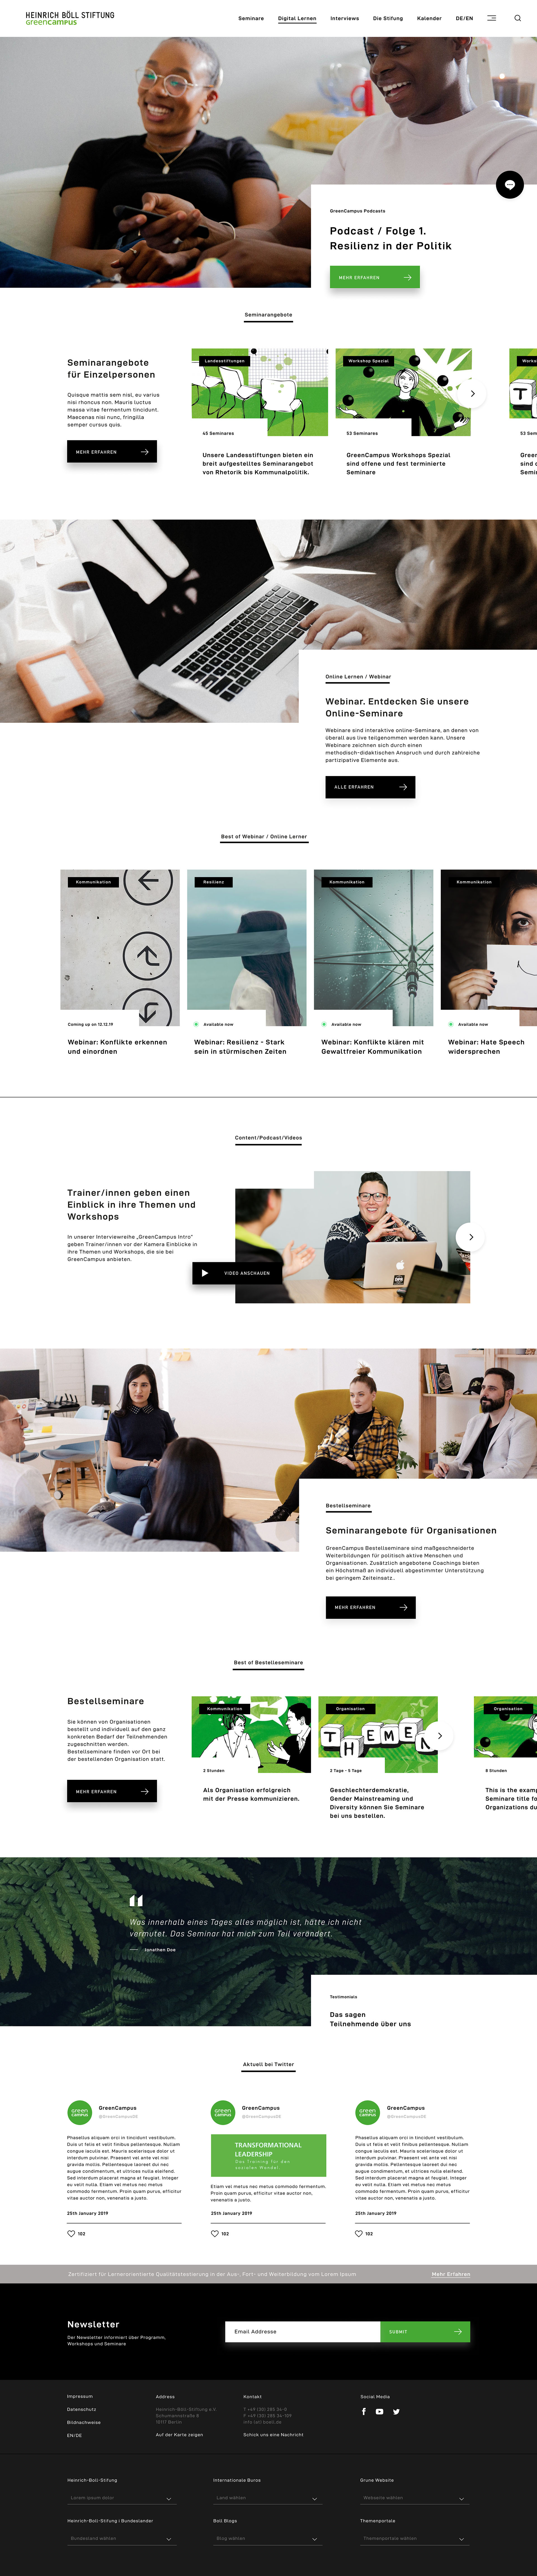 The user centric Website TRNSFRMNG designed for the Heinrich Böll Stiftung Green Campus.